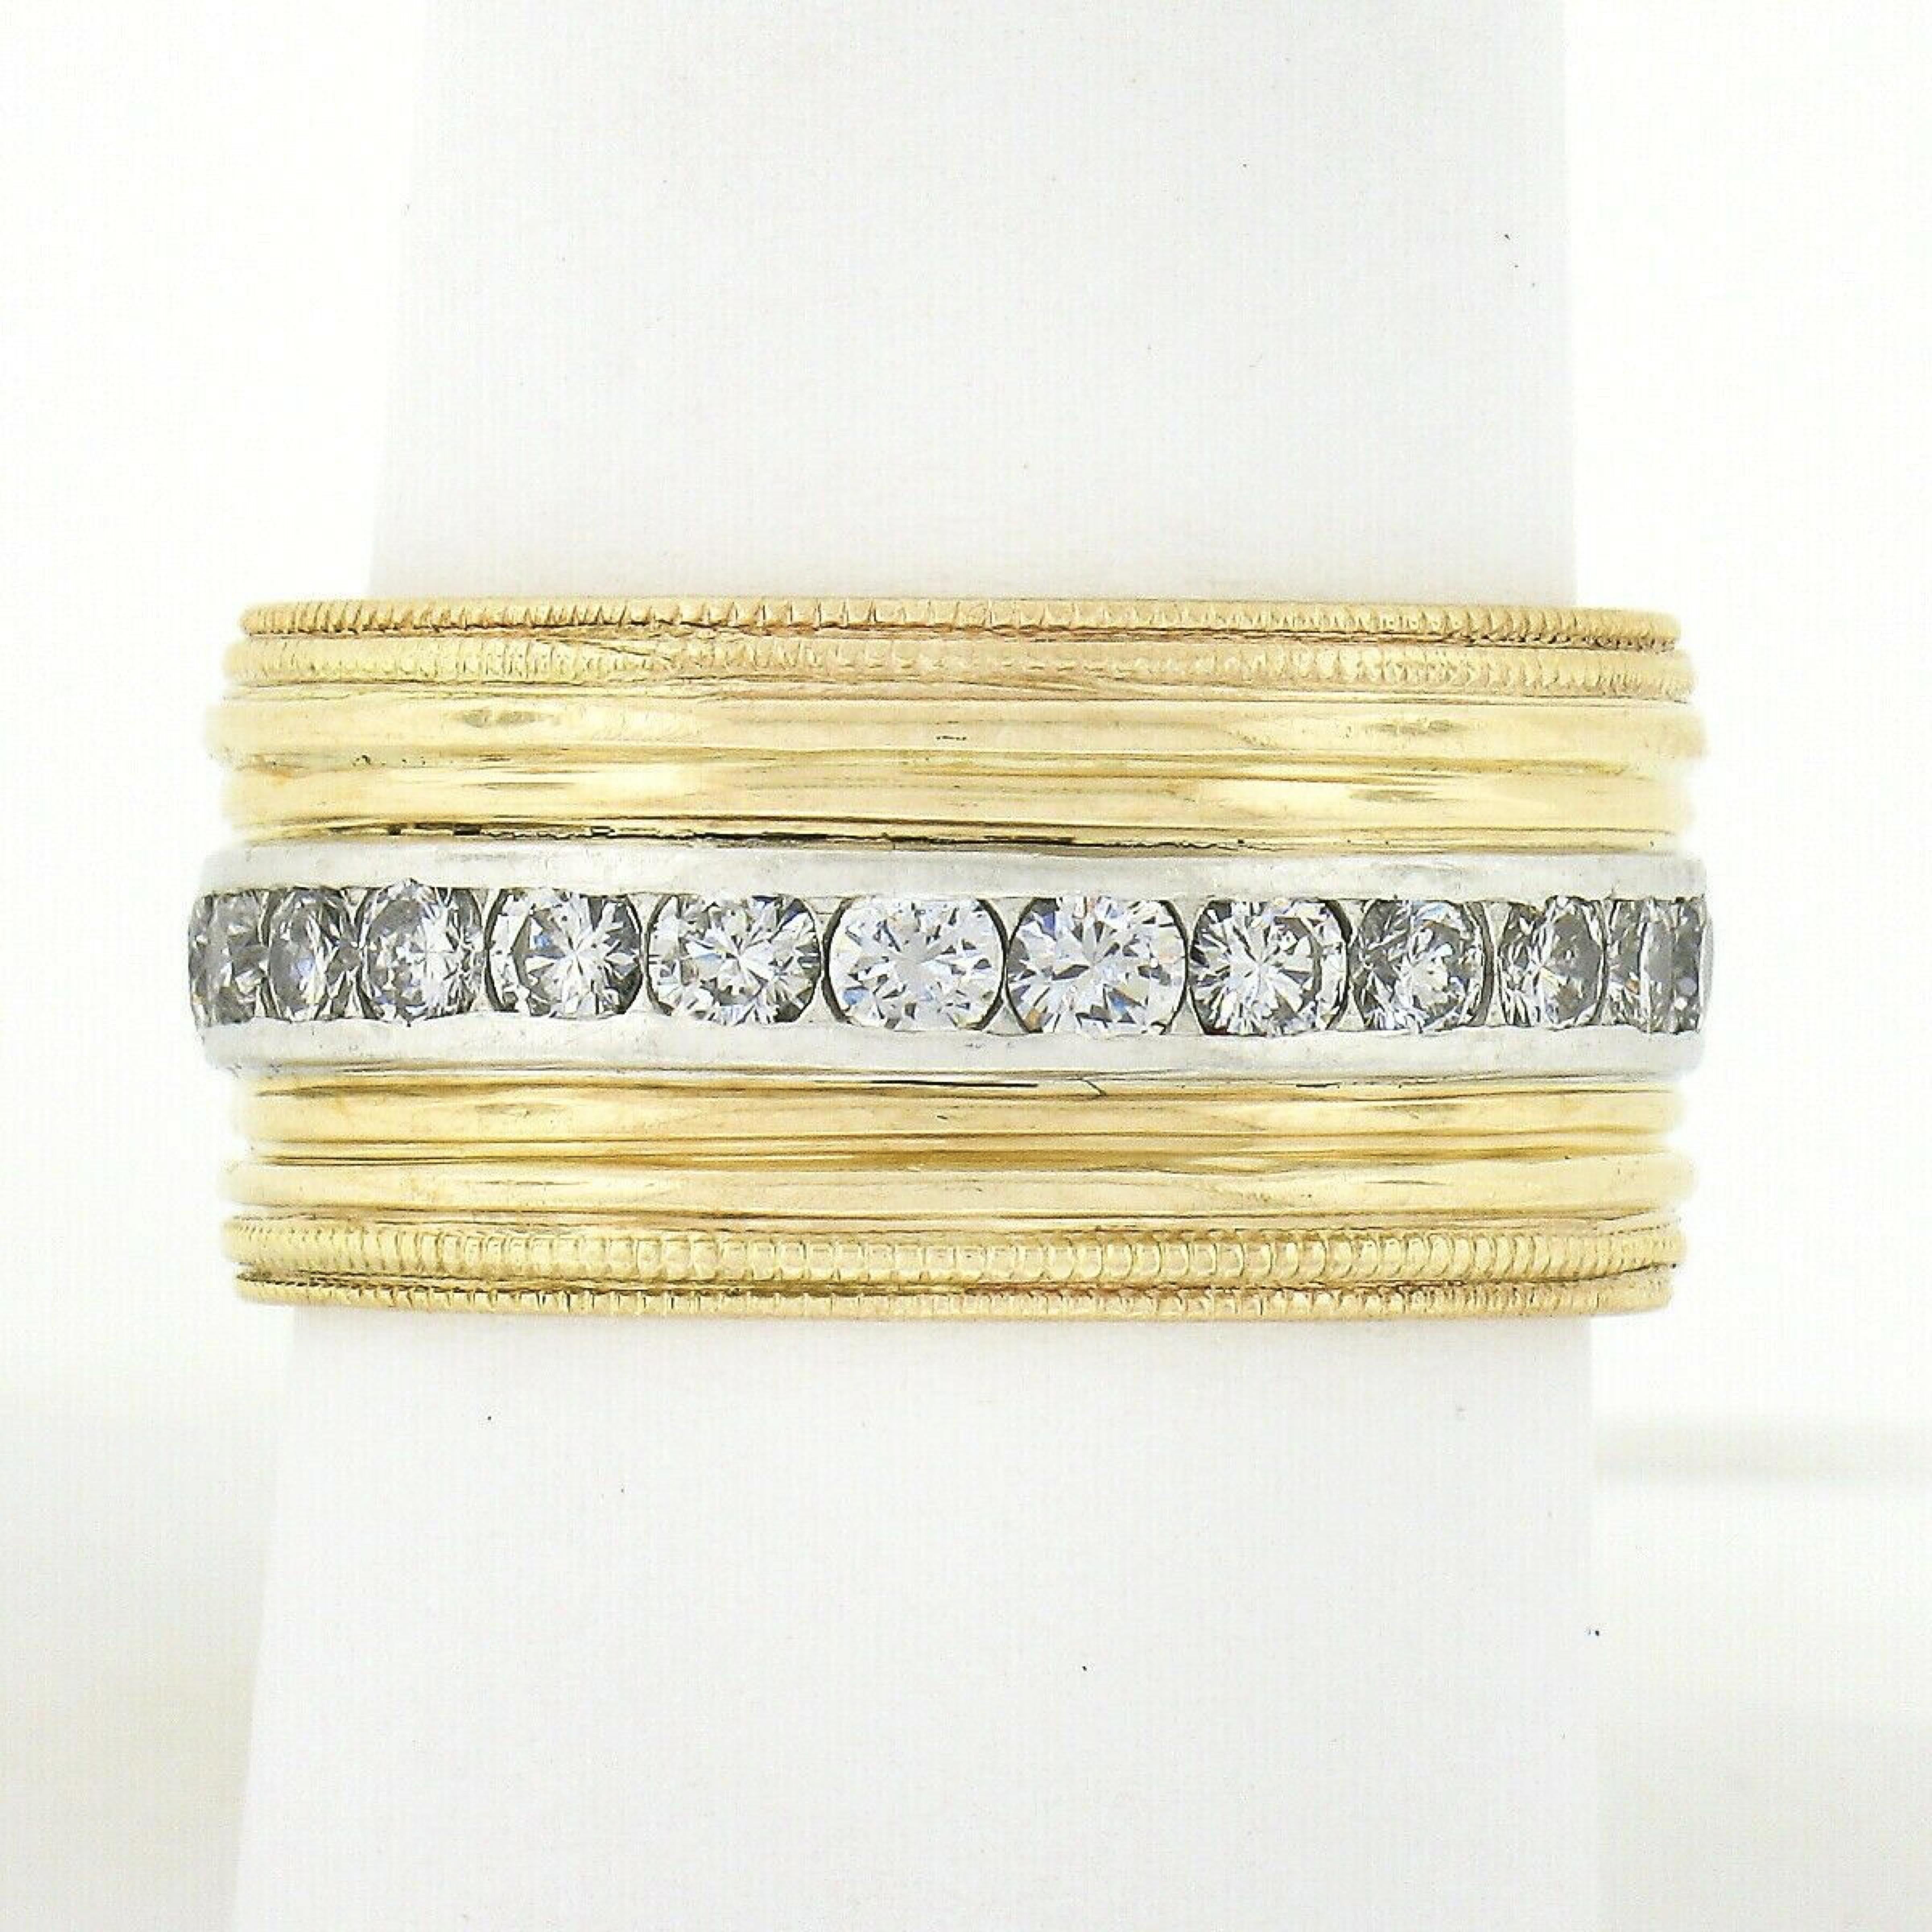 Here we have an absolutely gorgeous and wide vintage eternity band ring crafted from solid 14k yellow gold with a platinum center that carries 26 very fine quality diamonds entirely around the band. These stunning round brilliant diamonds total